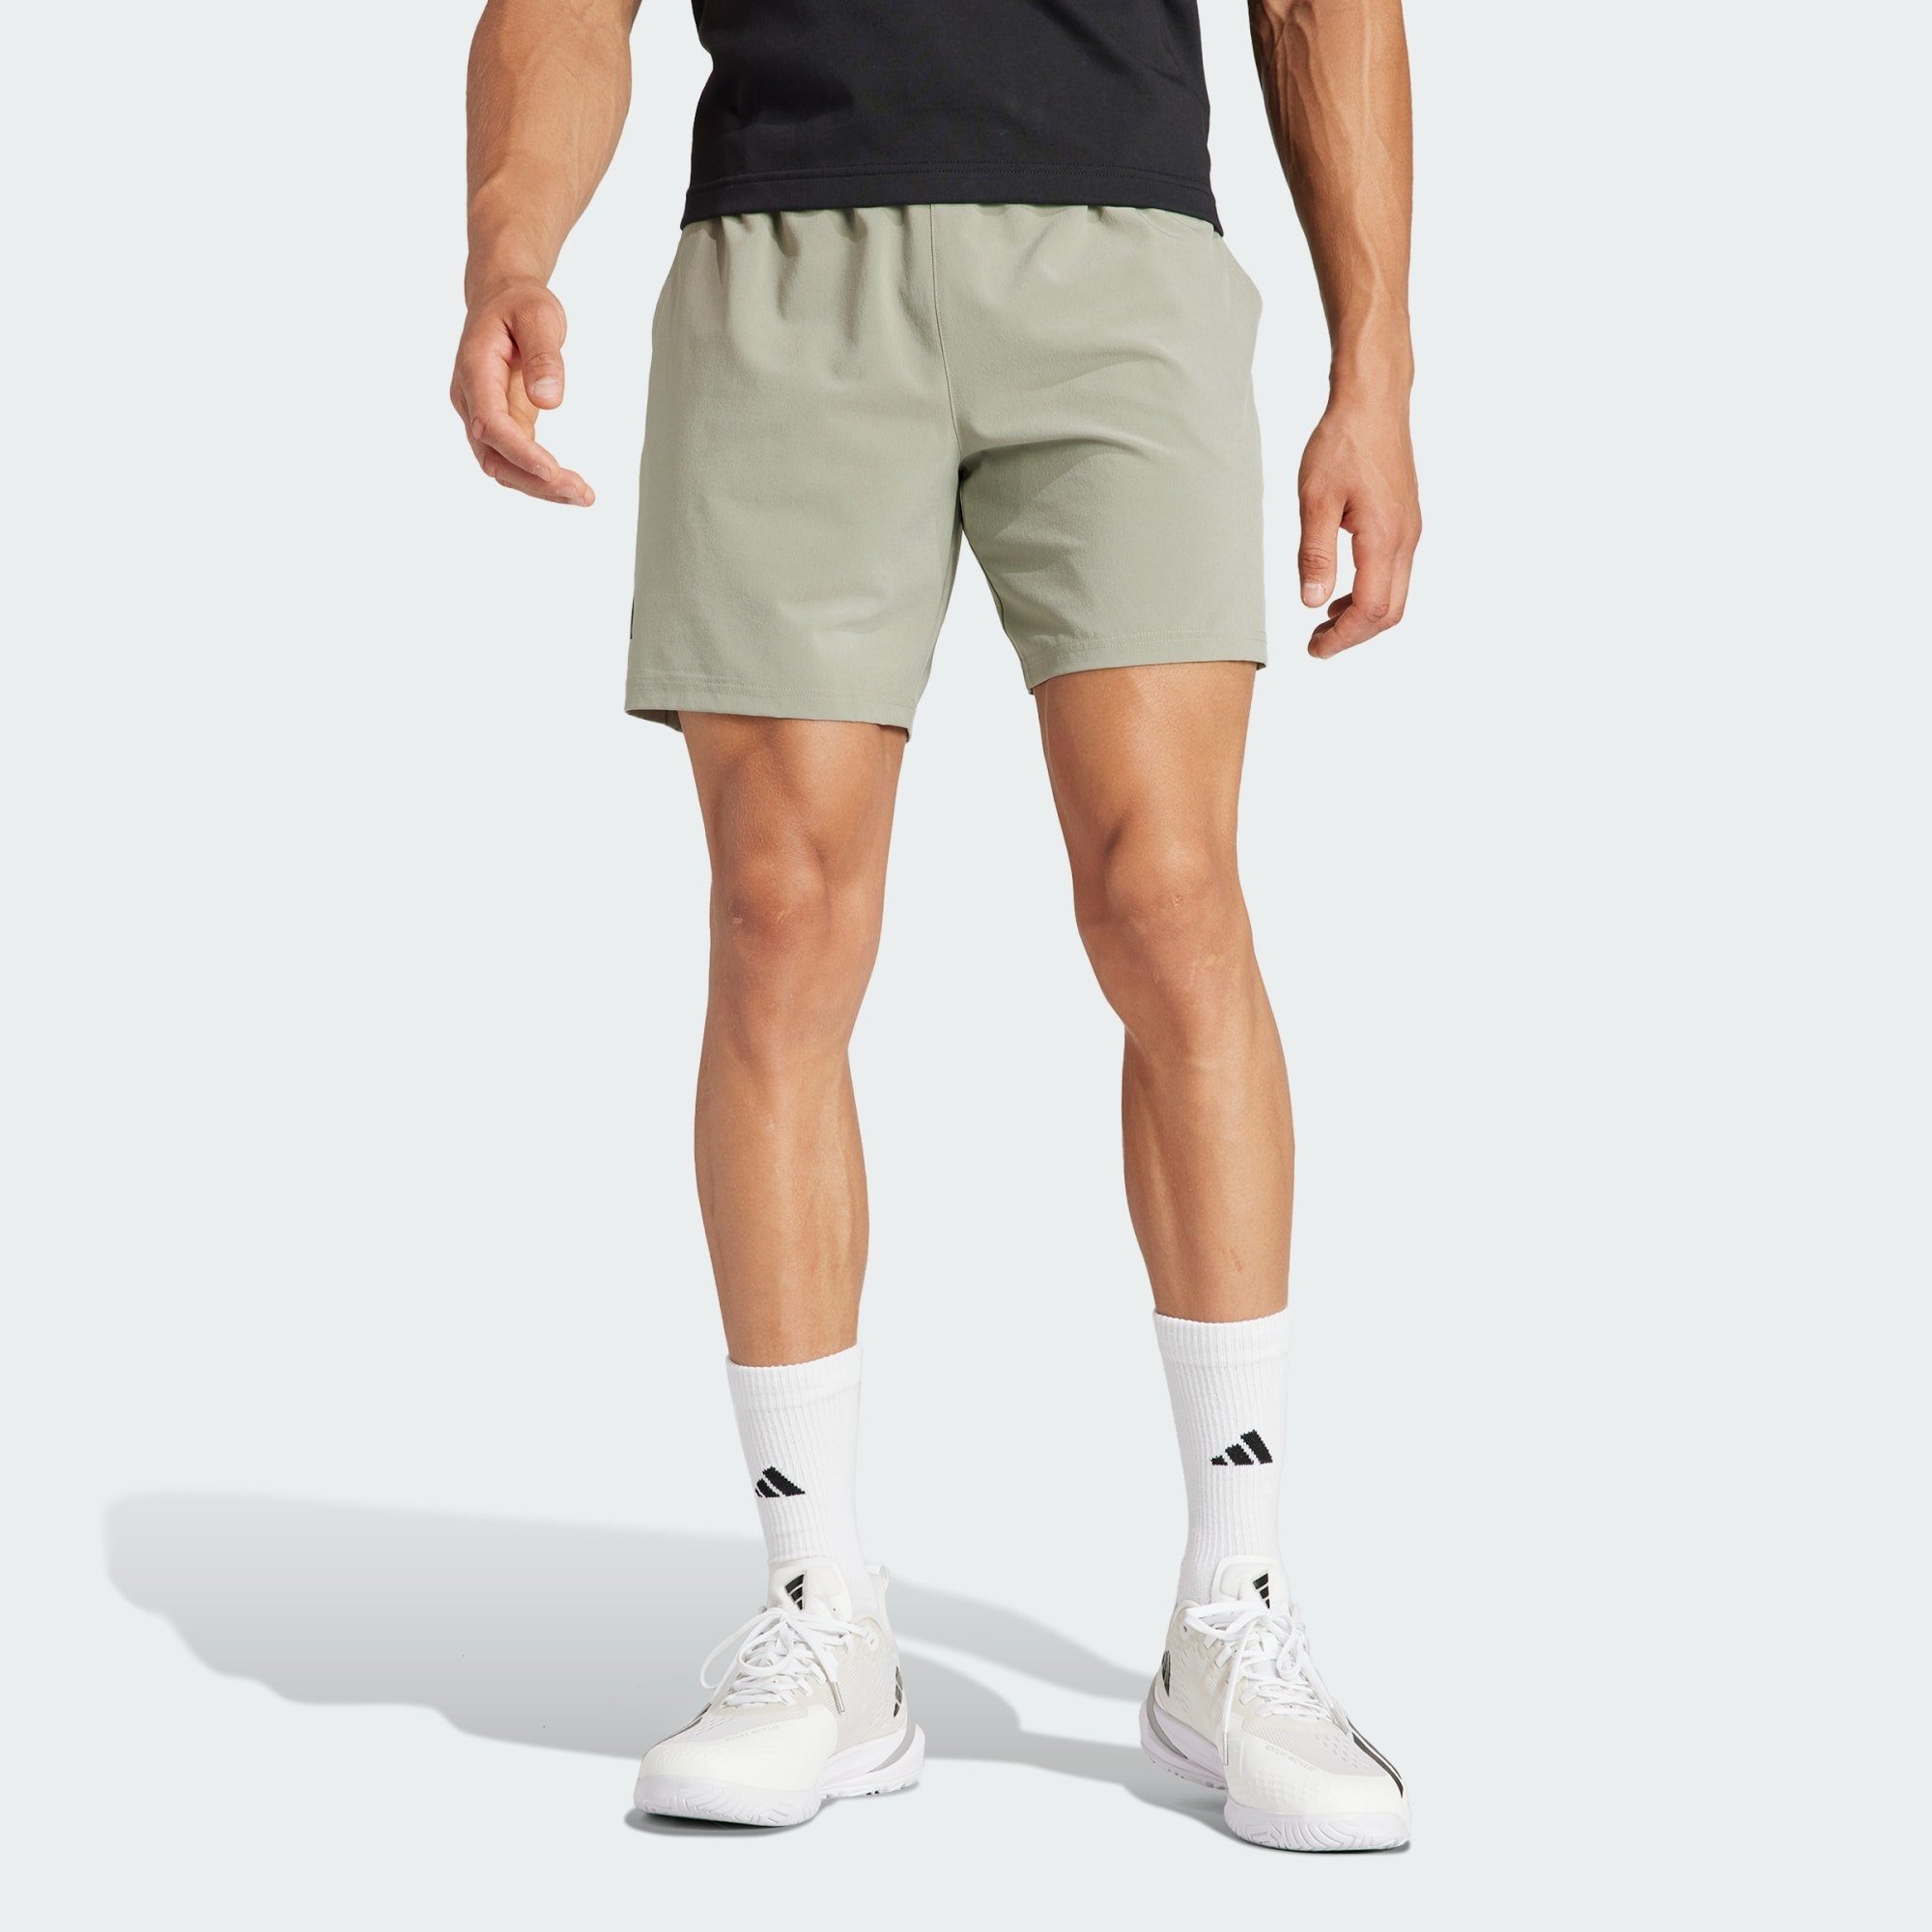 adidas Performance Funktionsshorts CLUB TENNIS STRETCH WOVEN SHORTS Silver Pebble